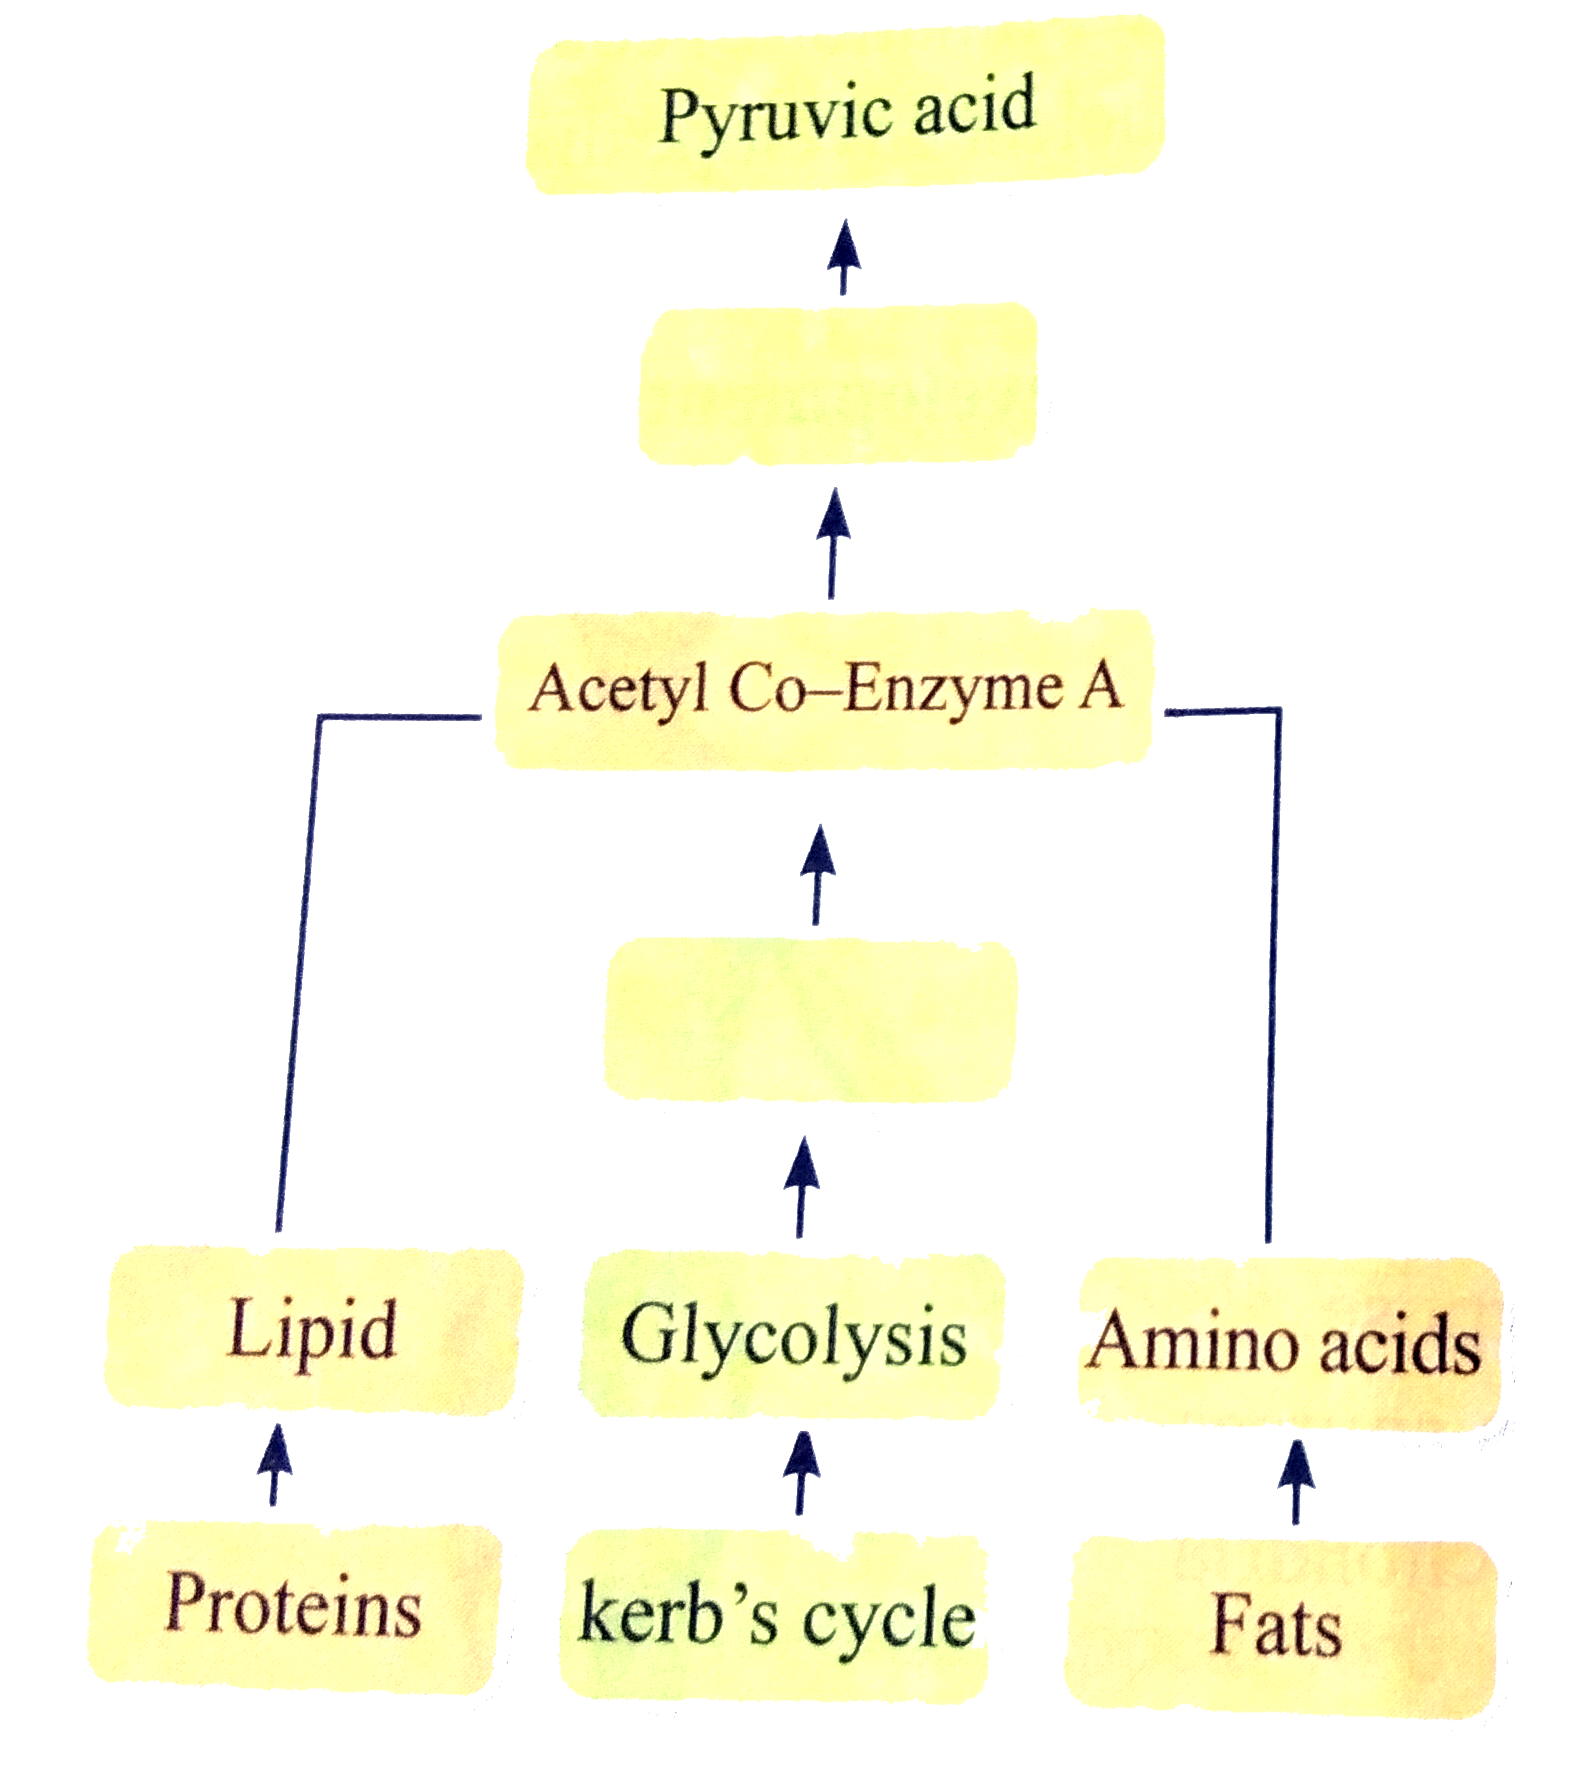 How energy is formed from oxidation of carbohydrates , fats and proteins? Correct the diagram given below.